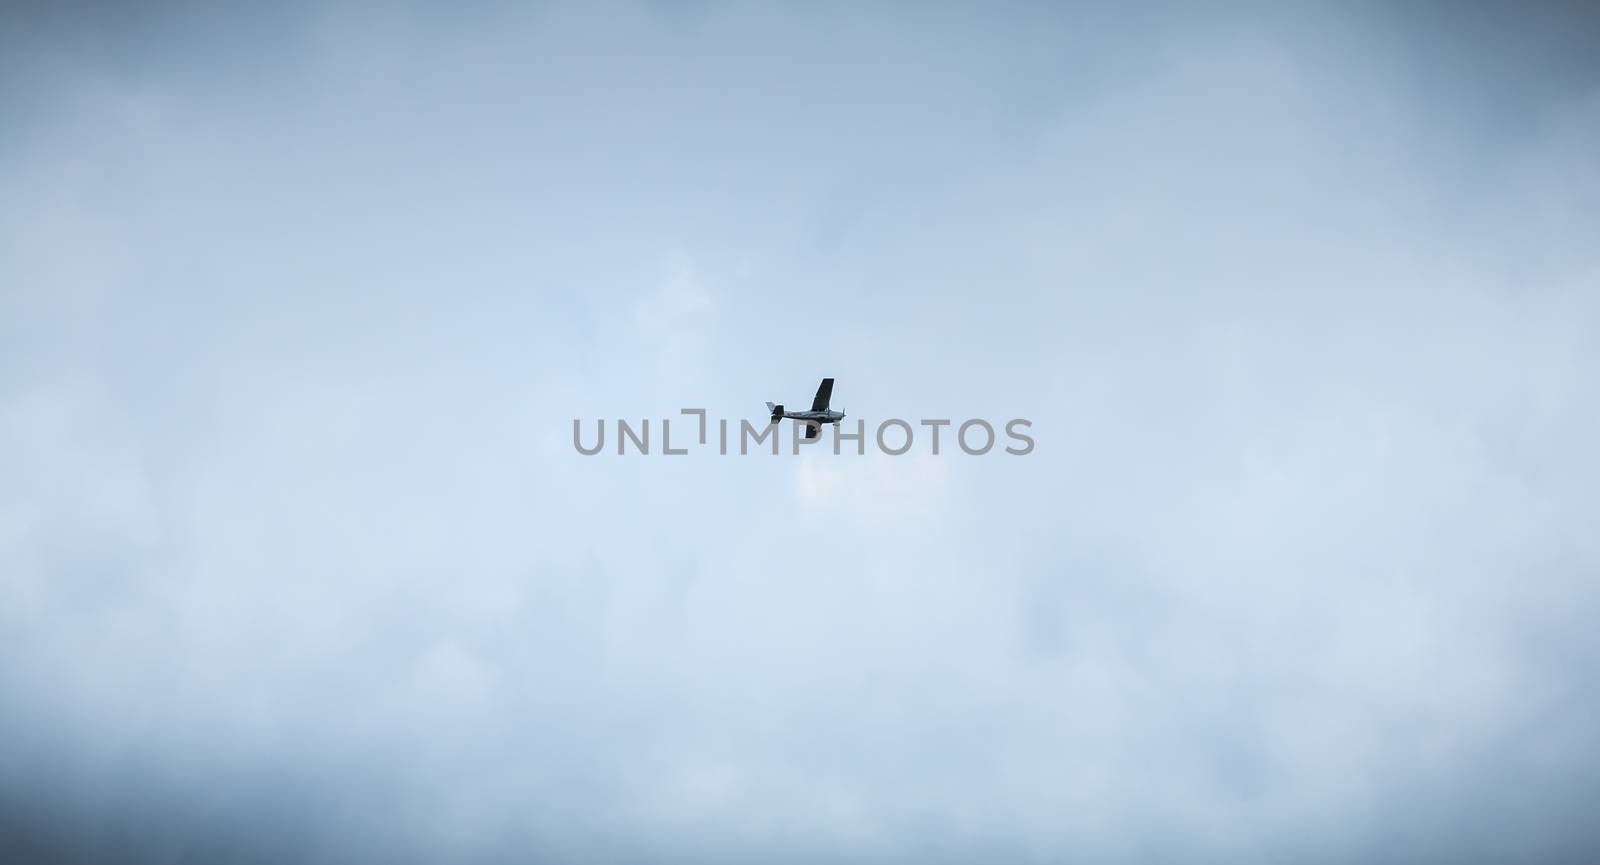 Port Joinville, France - September 16, 2018: Small passenger plane flying over Isle of Yeu near France on a fall day